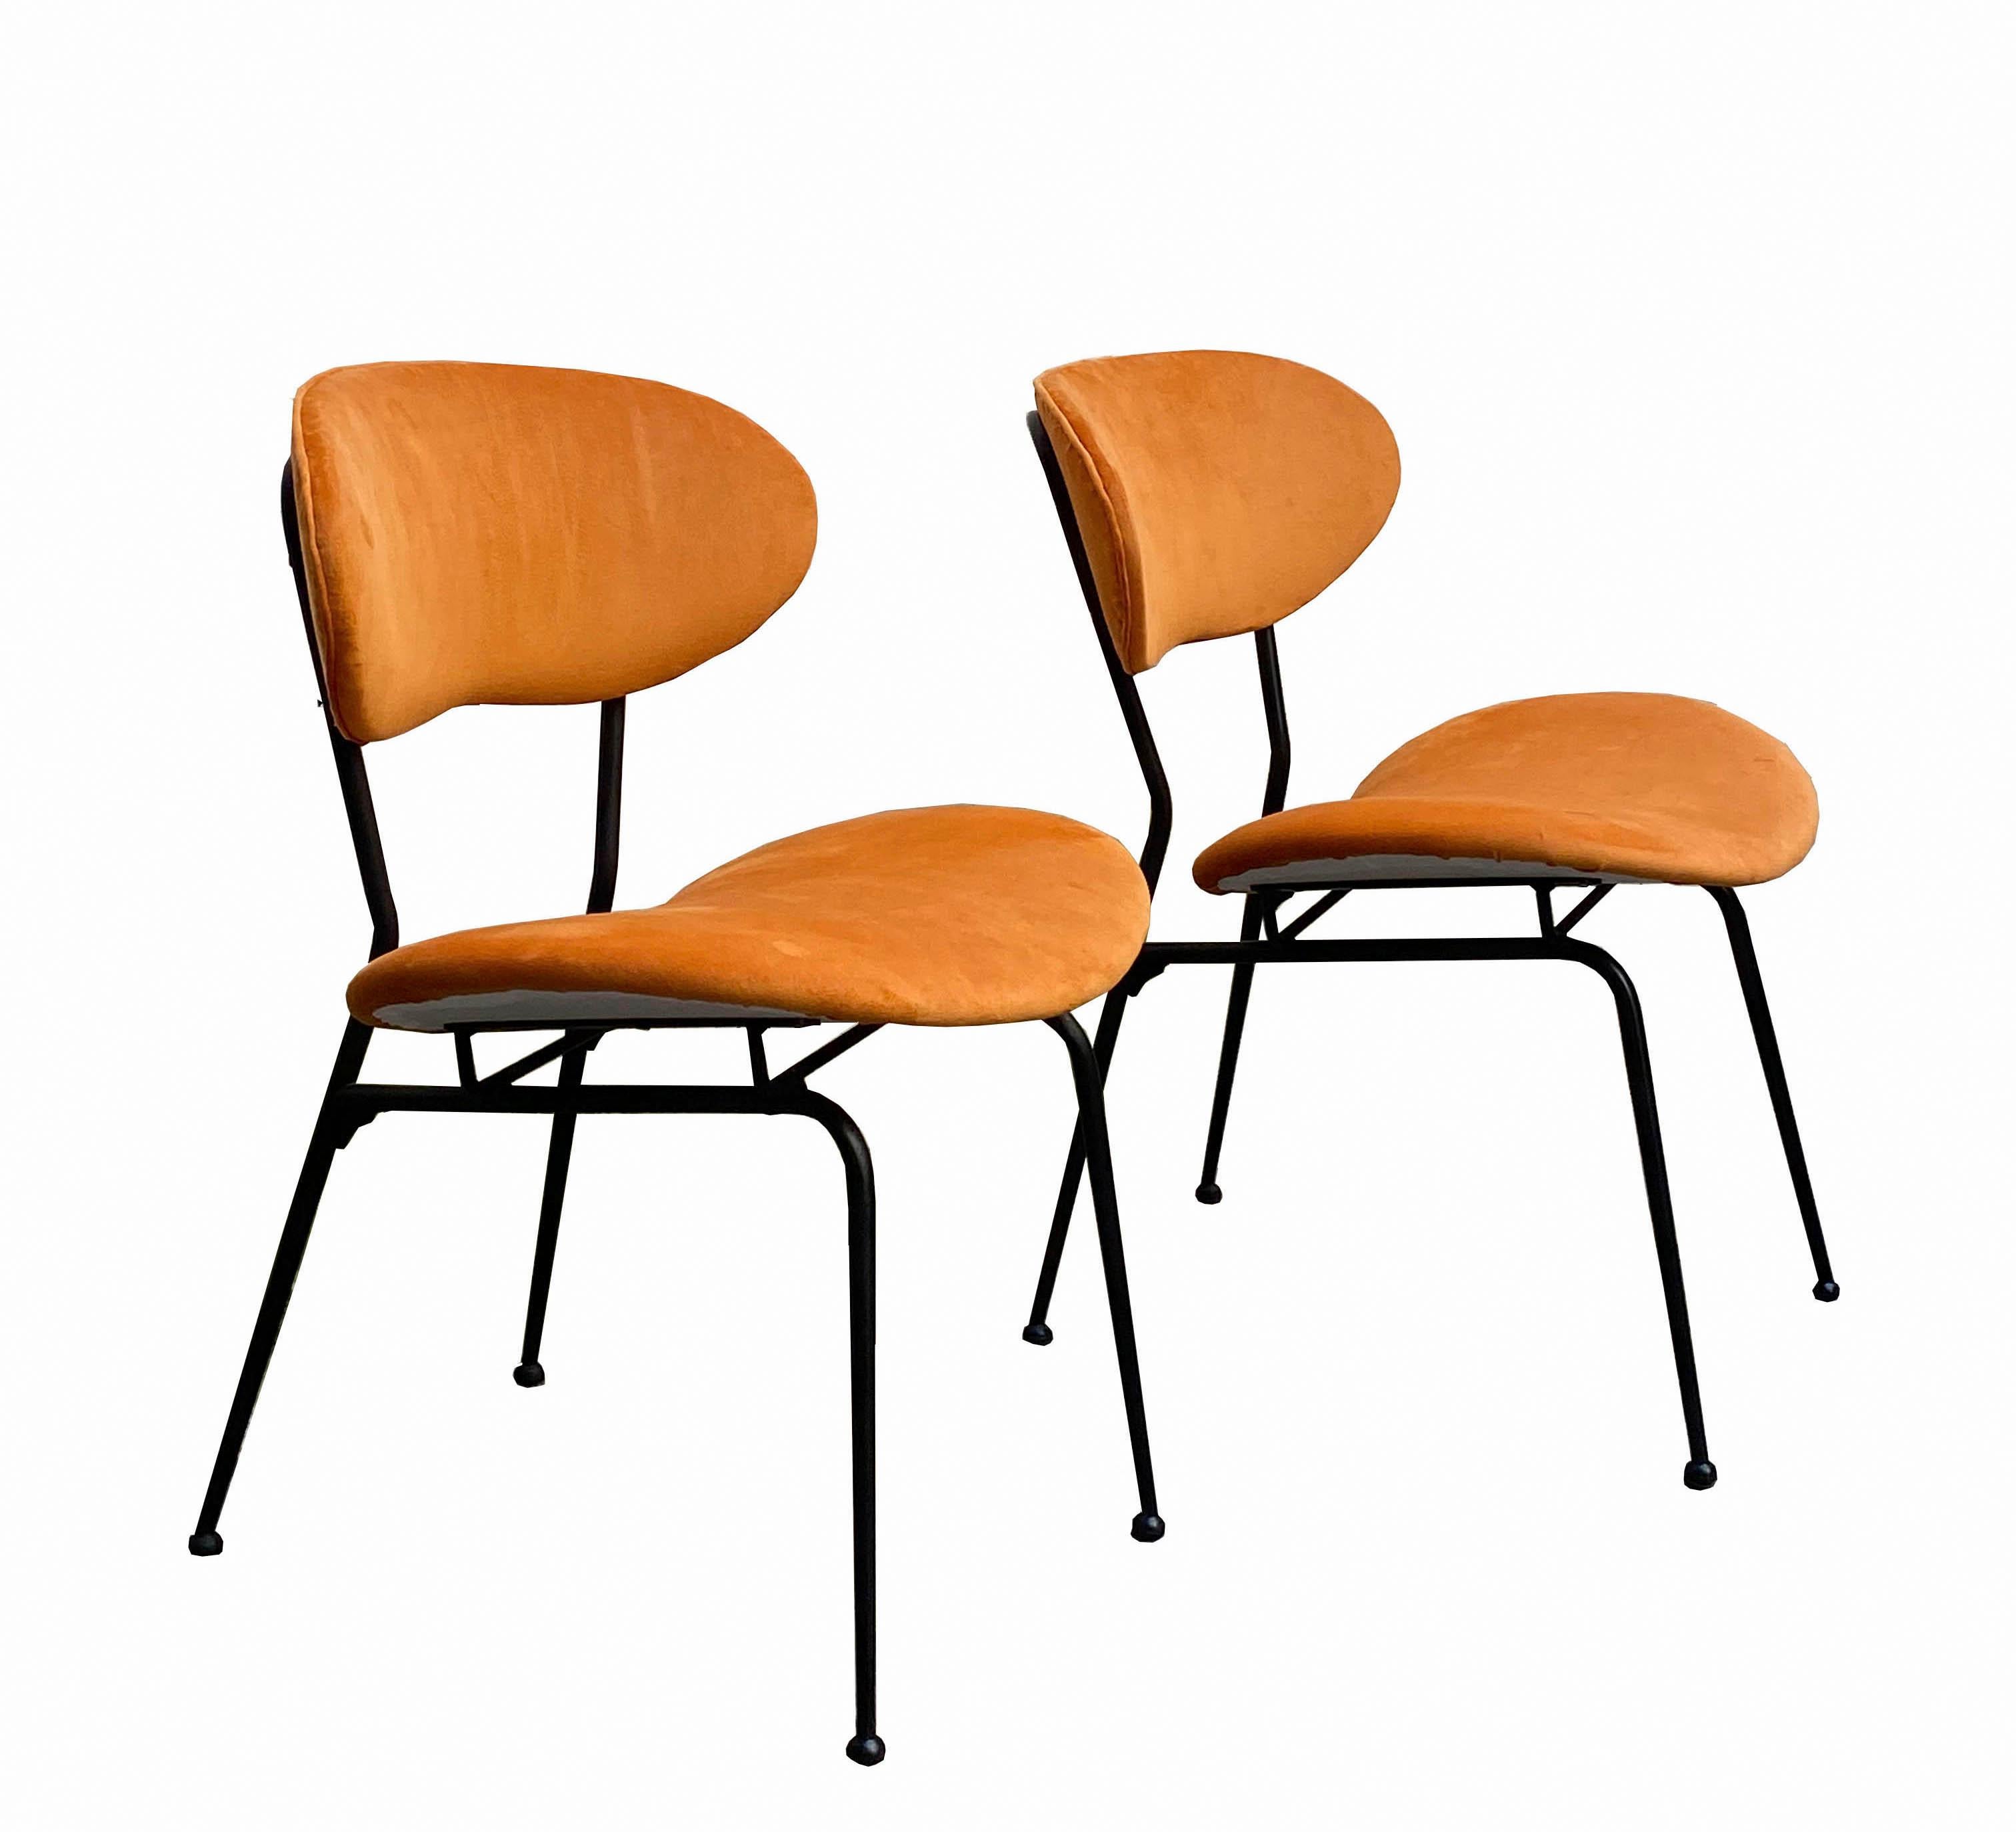 Set of 2 dining chairs by Gastone Rinaldi with black enamelled metal frame, anatomical seats and backs upholstered in light orange velvet. Produced by Rima in Italy in the 1950s.